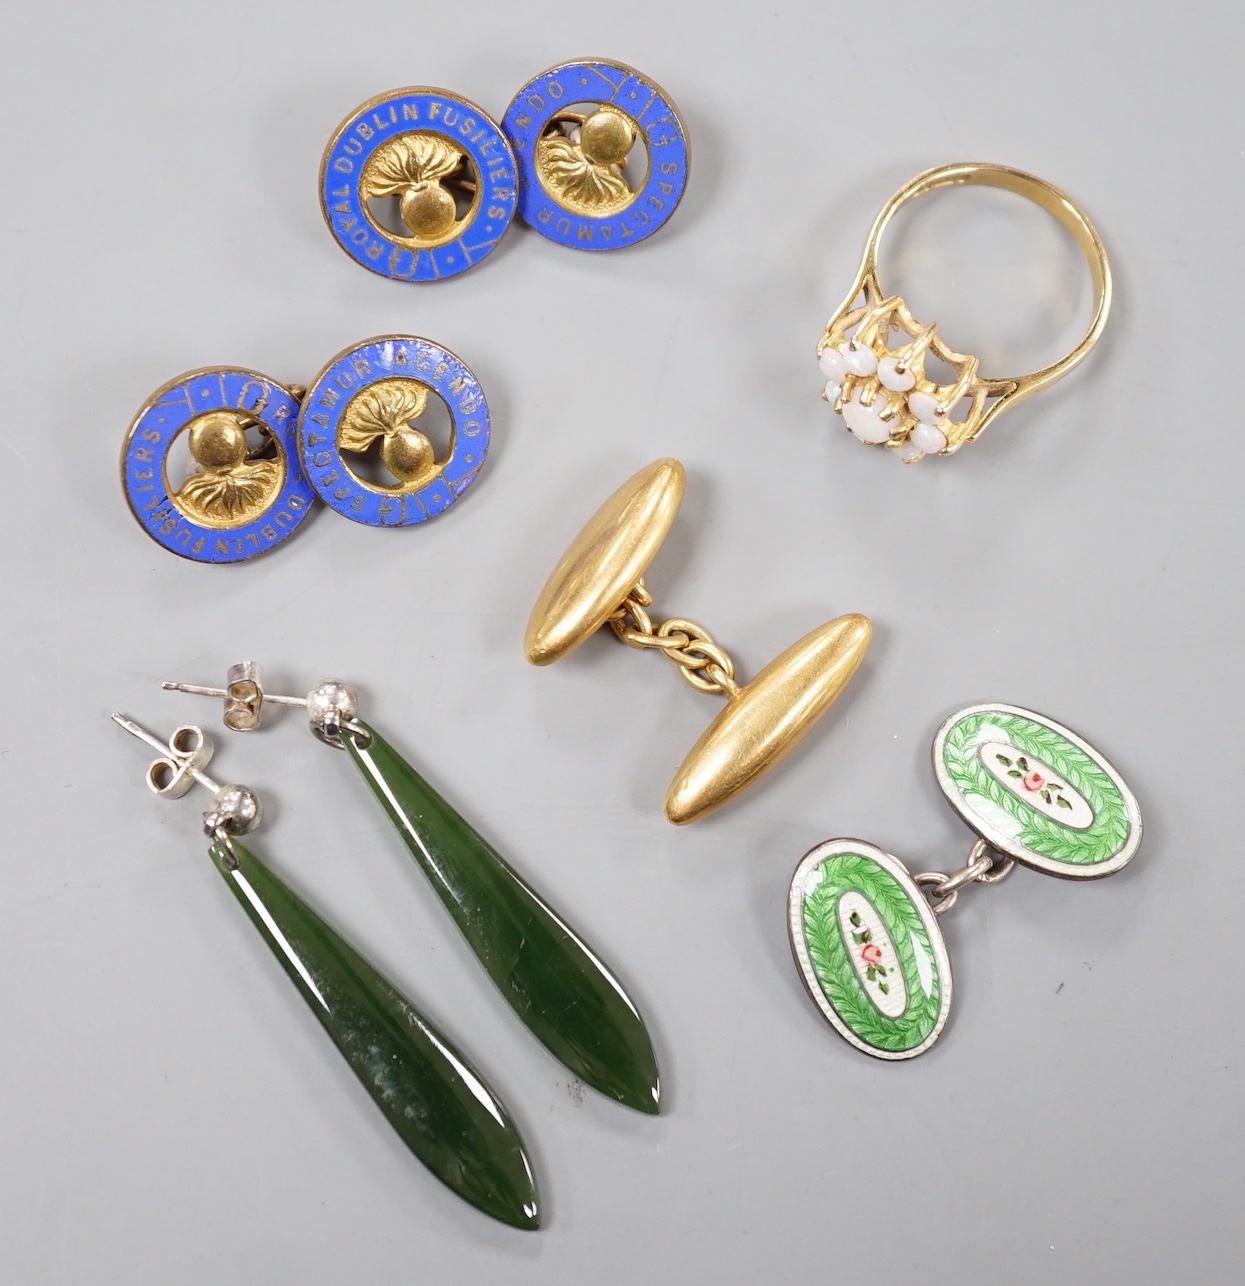 Mixed jewellery including a 9ct gold and opal cluster dress ring, gross 2.8 grams, an 18ct gold cufflink, 3.7 grams and other cufflinks and pair of earrings.